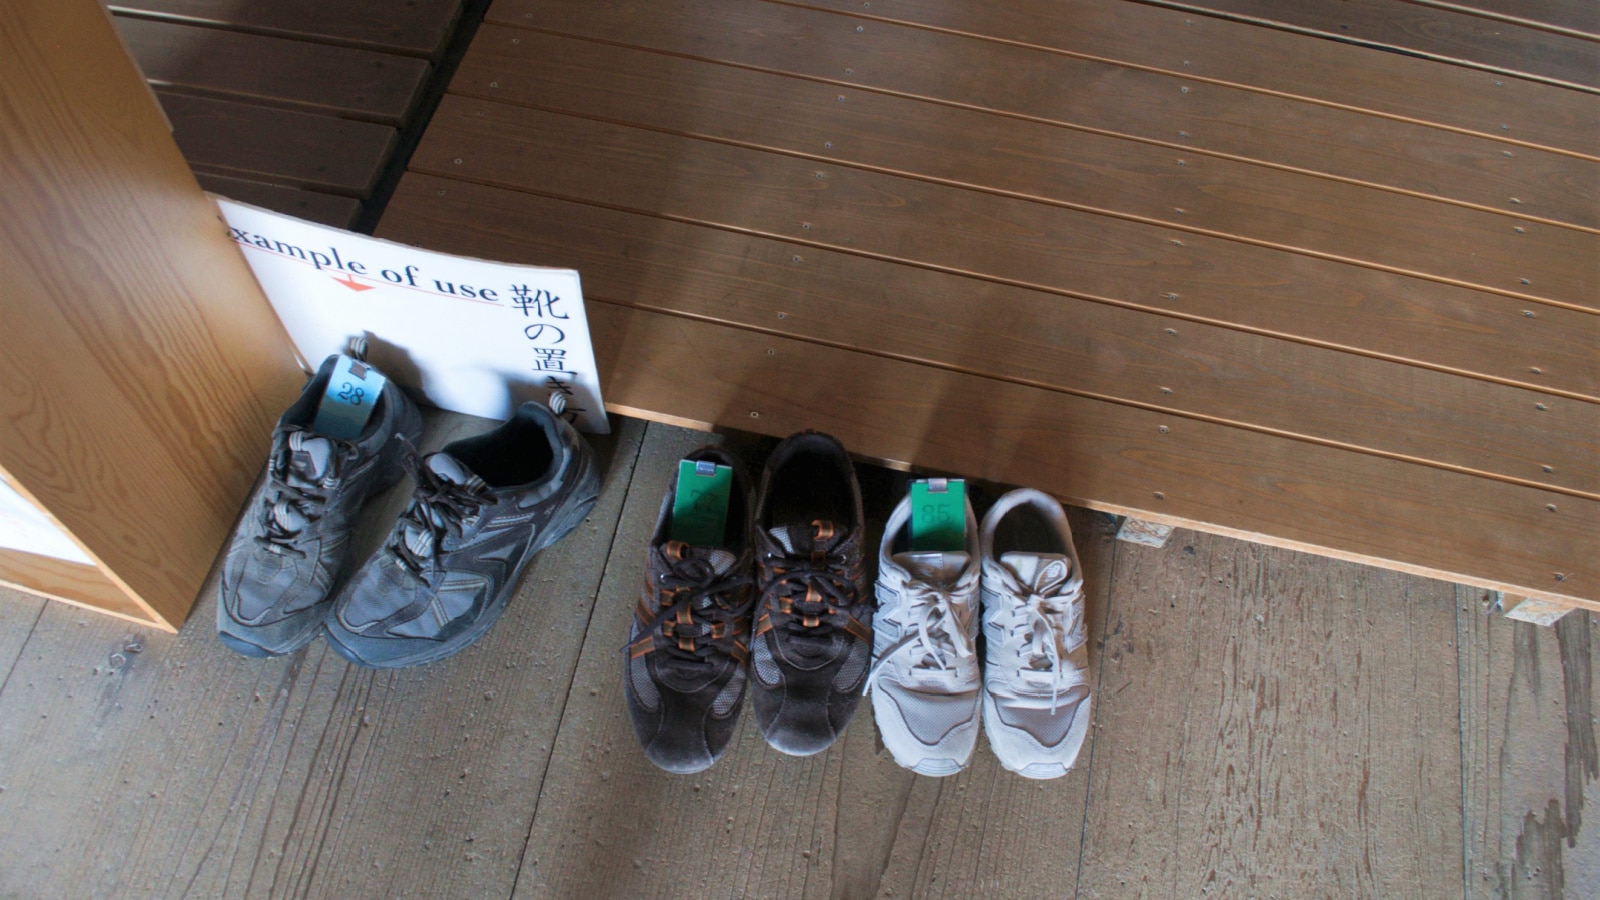 Hokke-do Hall, Japan - April 4, 2019 : Entrance to Hokkedo where visitors should leave their shoes before entering the Hall. An example is shown at the left side.